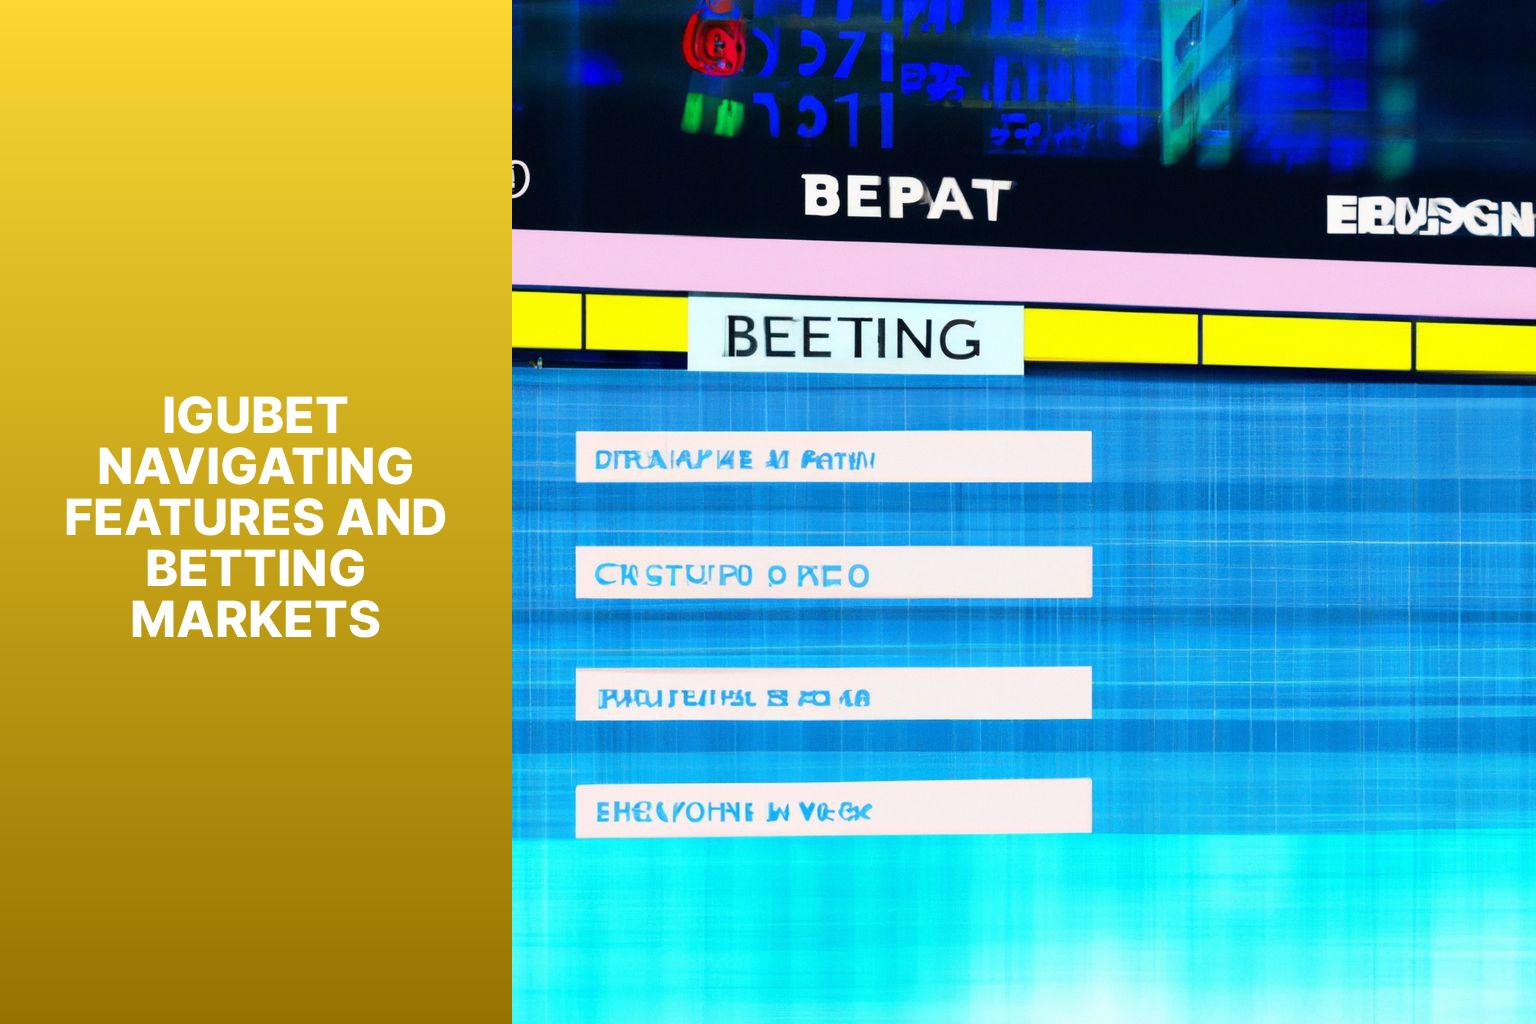 IguBet Navigating Features and Betting Markets